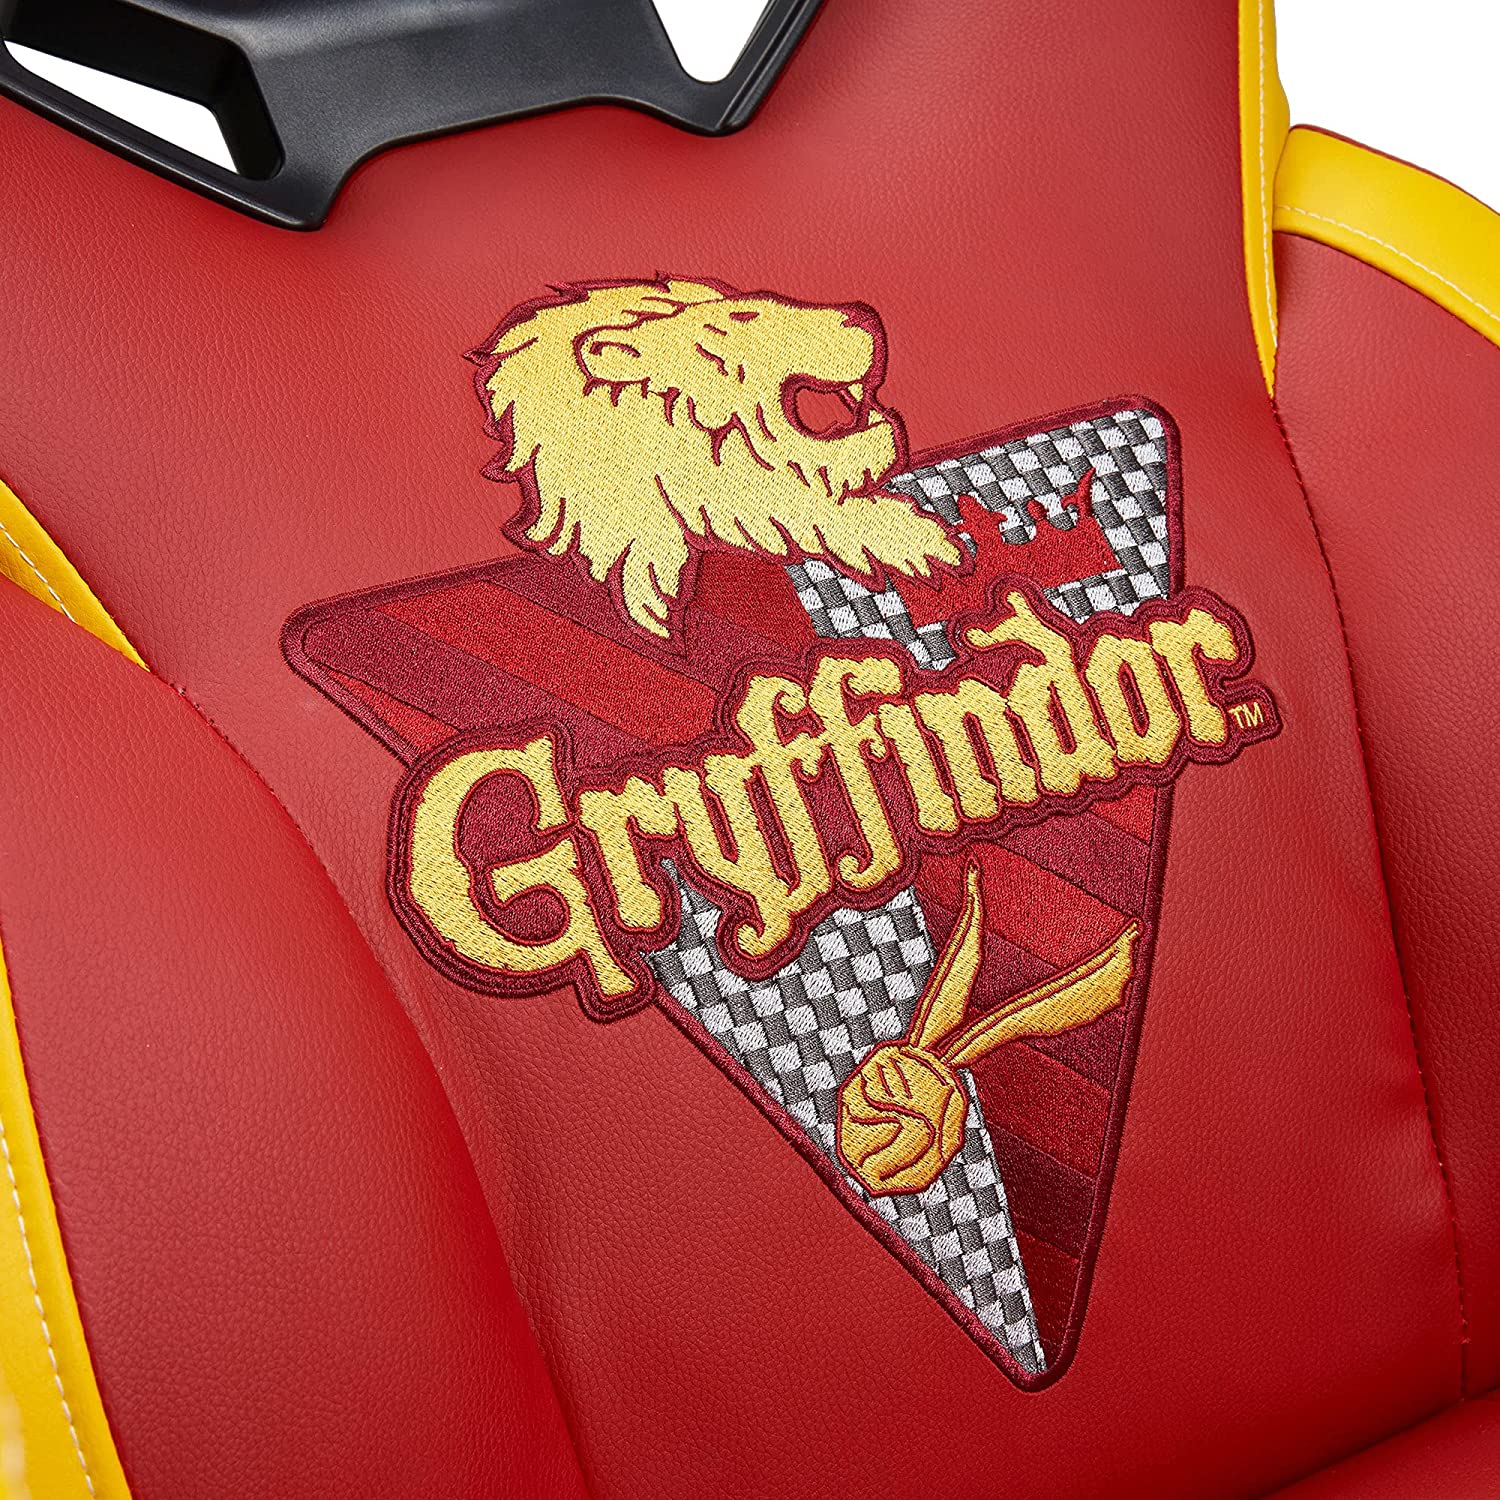 SuBsonic Harry Potter Junior Griffindor - Gaming-Sessel